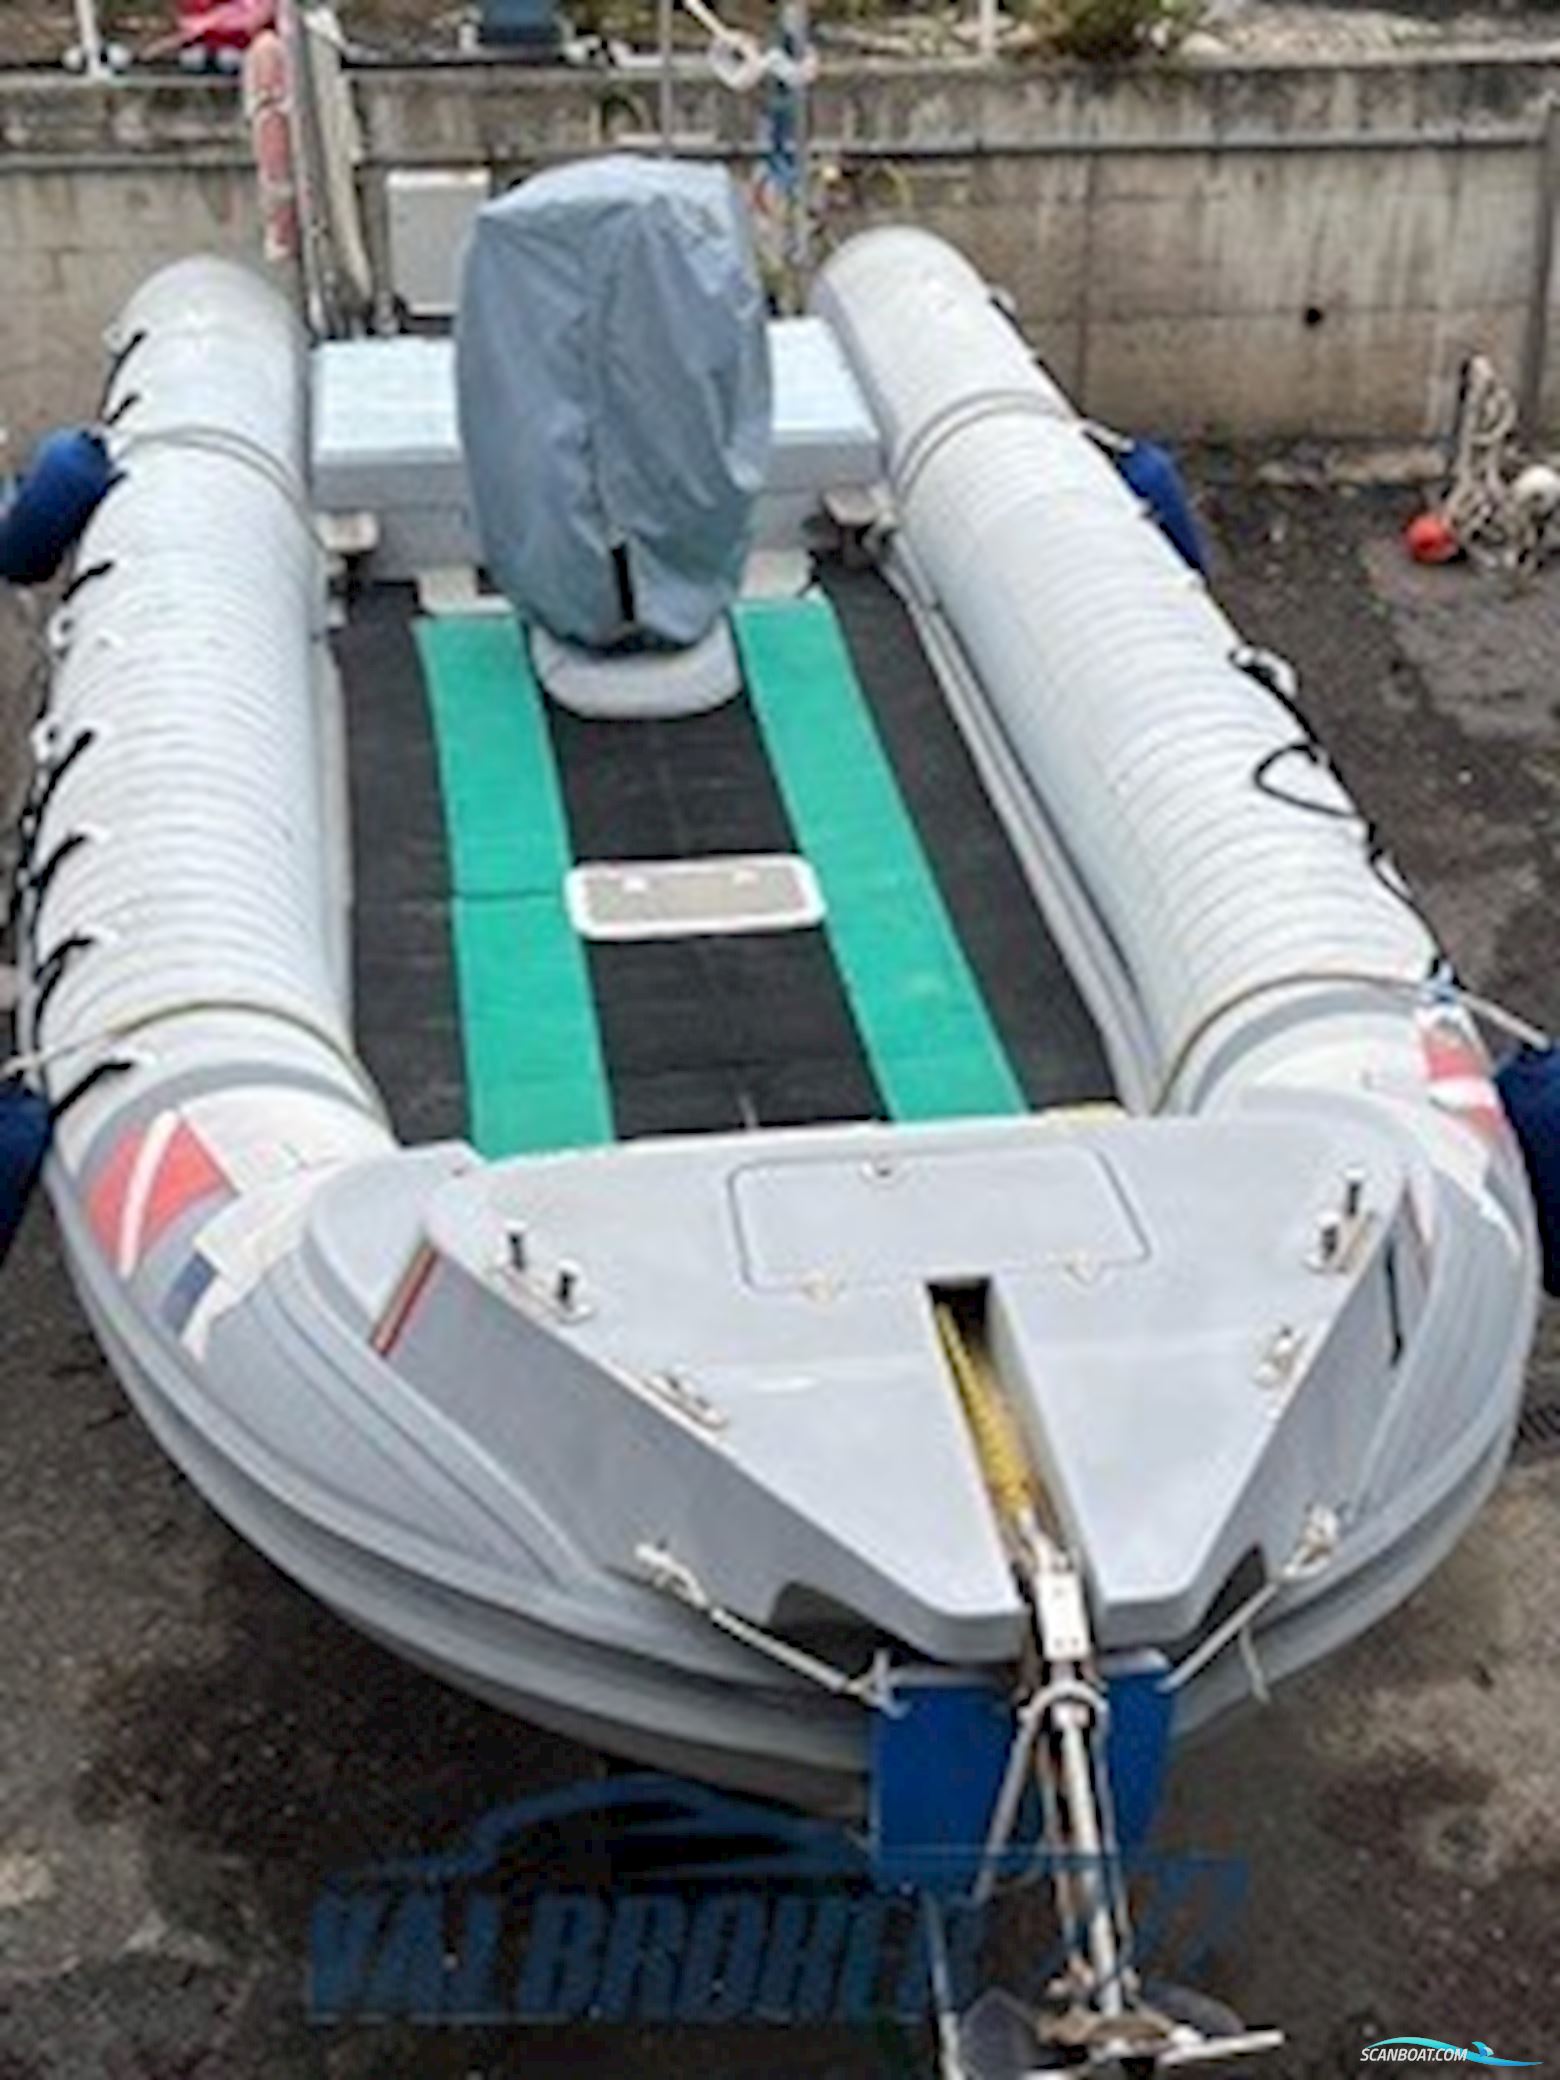 Scanner One 800 D Inflatable / Rib 2019, with Mercruiser Mag 377 engine, Italy